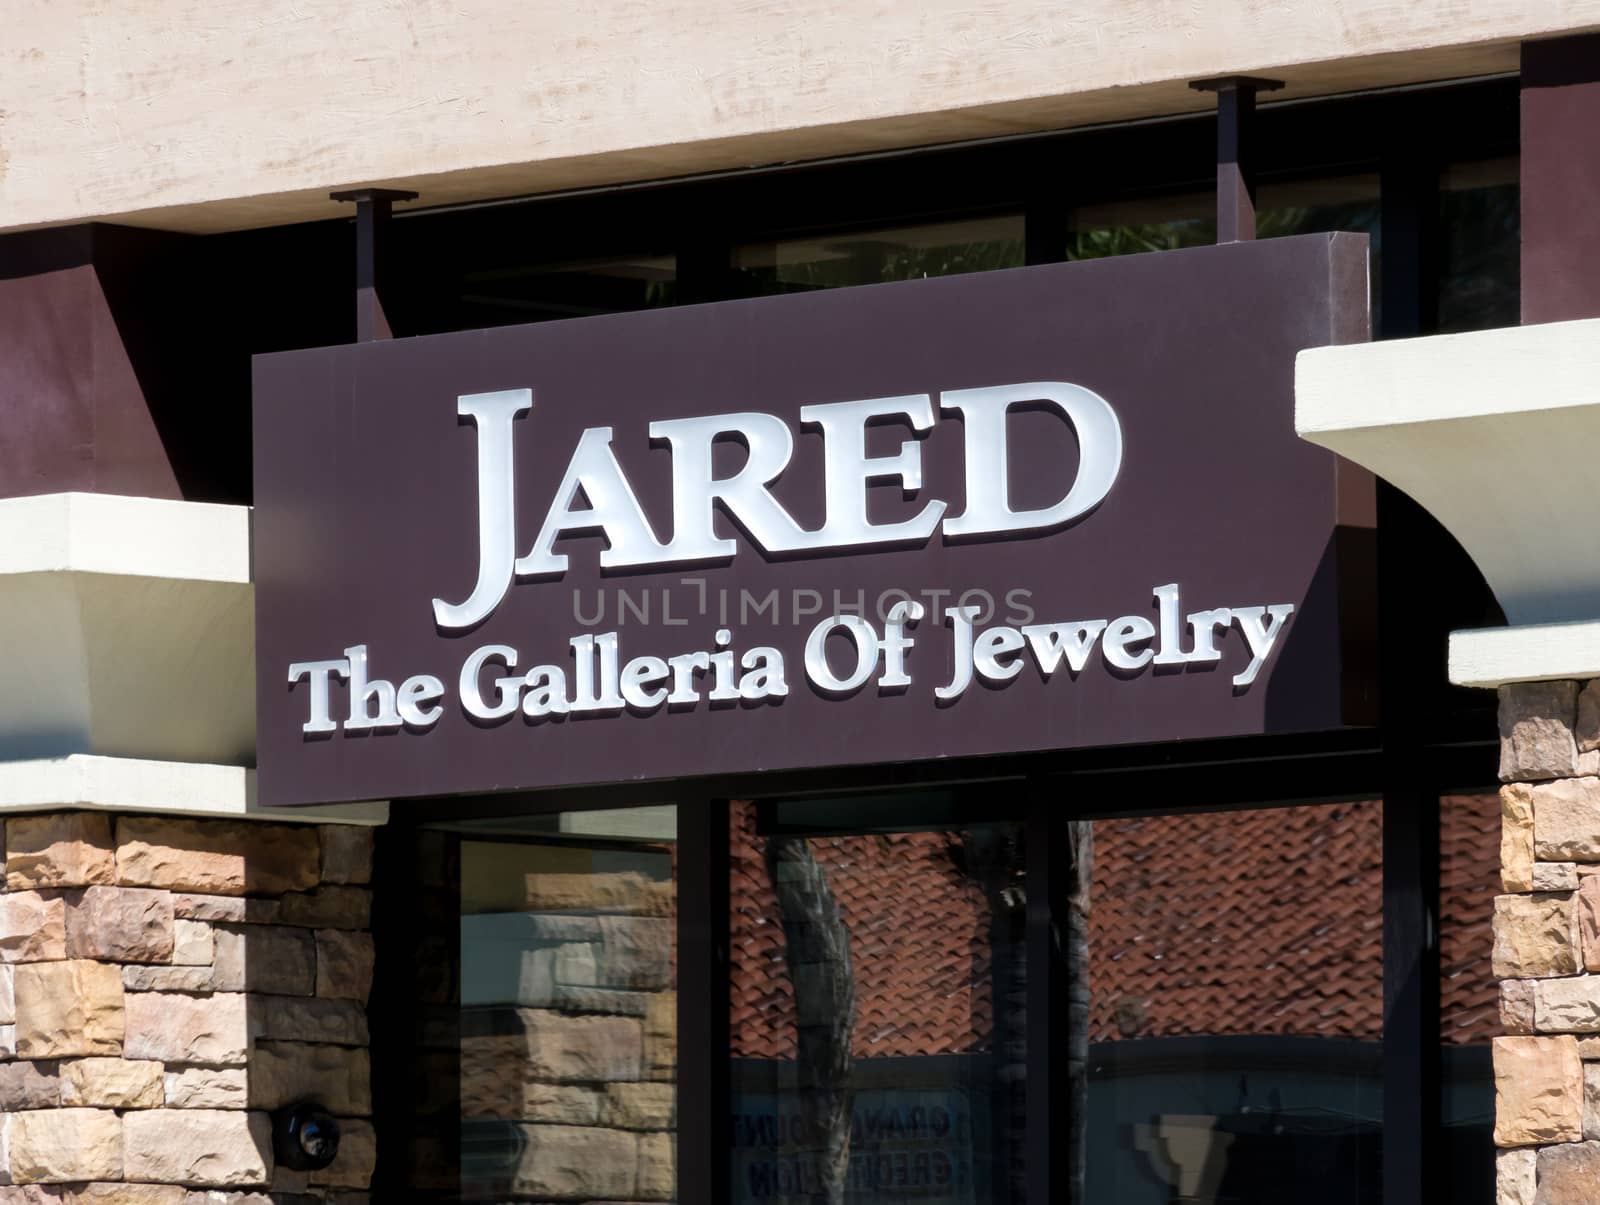 MISSION VIEJO, CA/USA - APRIL 2, 2016: Jared jewelry store exterior and logo. Jared is a subsidiary ofSterling Jewelers, Inc. an American specialty jewelry company.